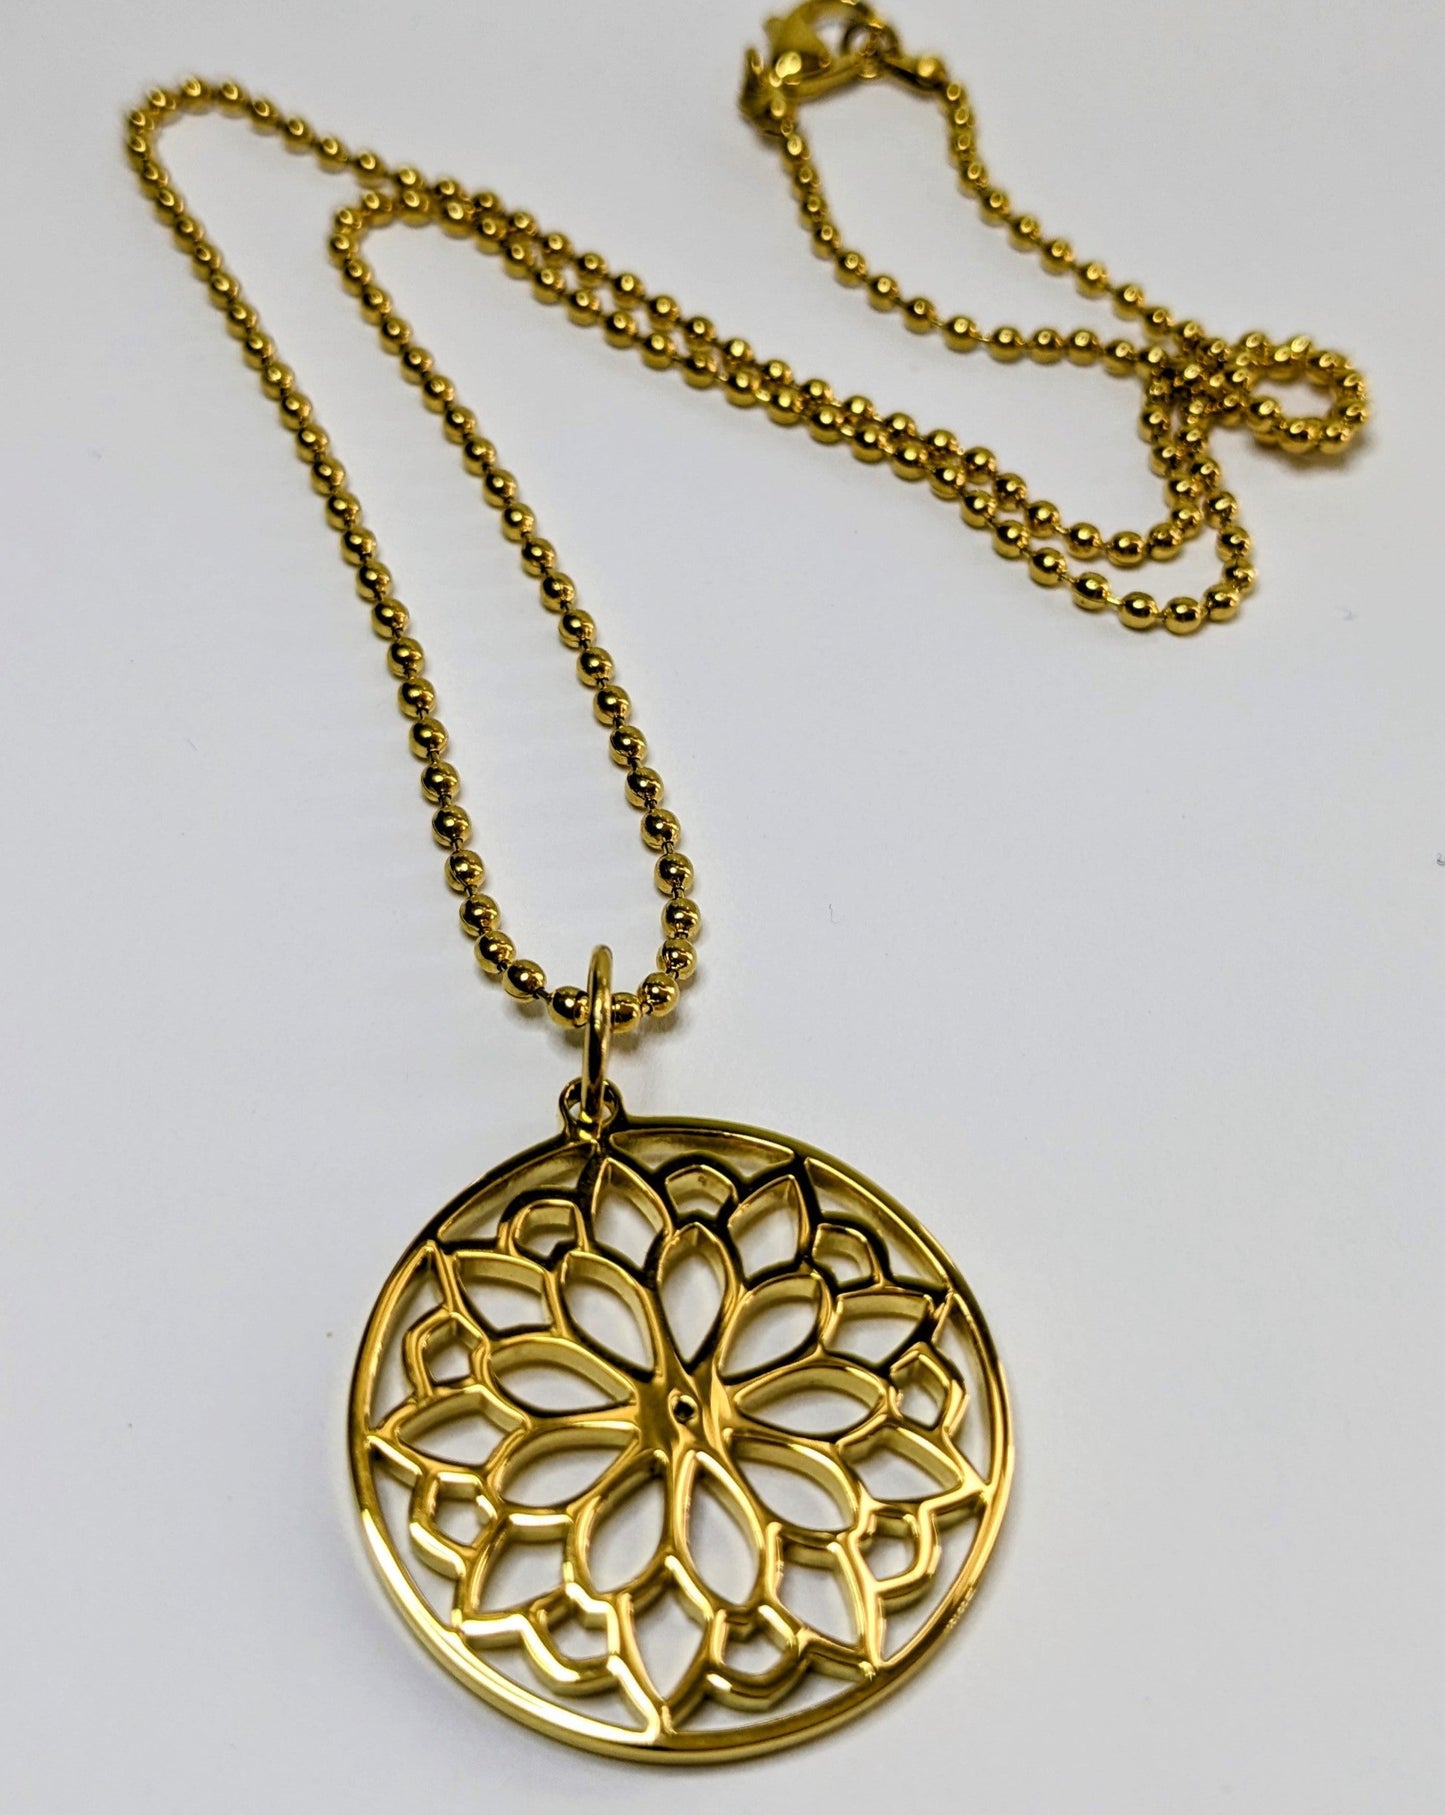 Stainless steel Mandala charm necklace gold